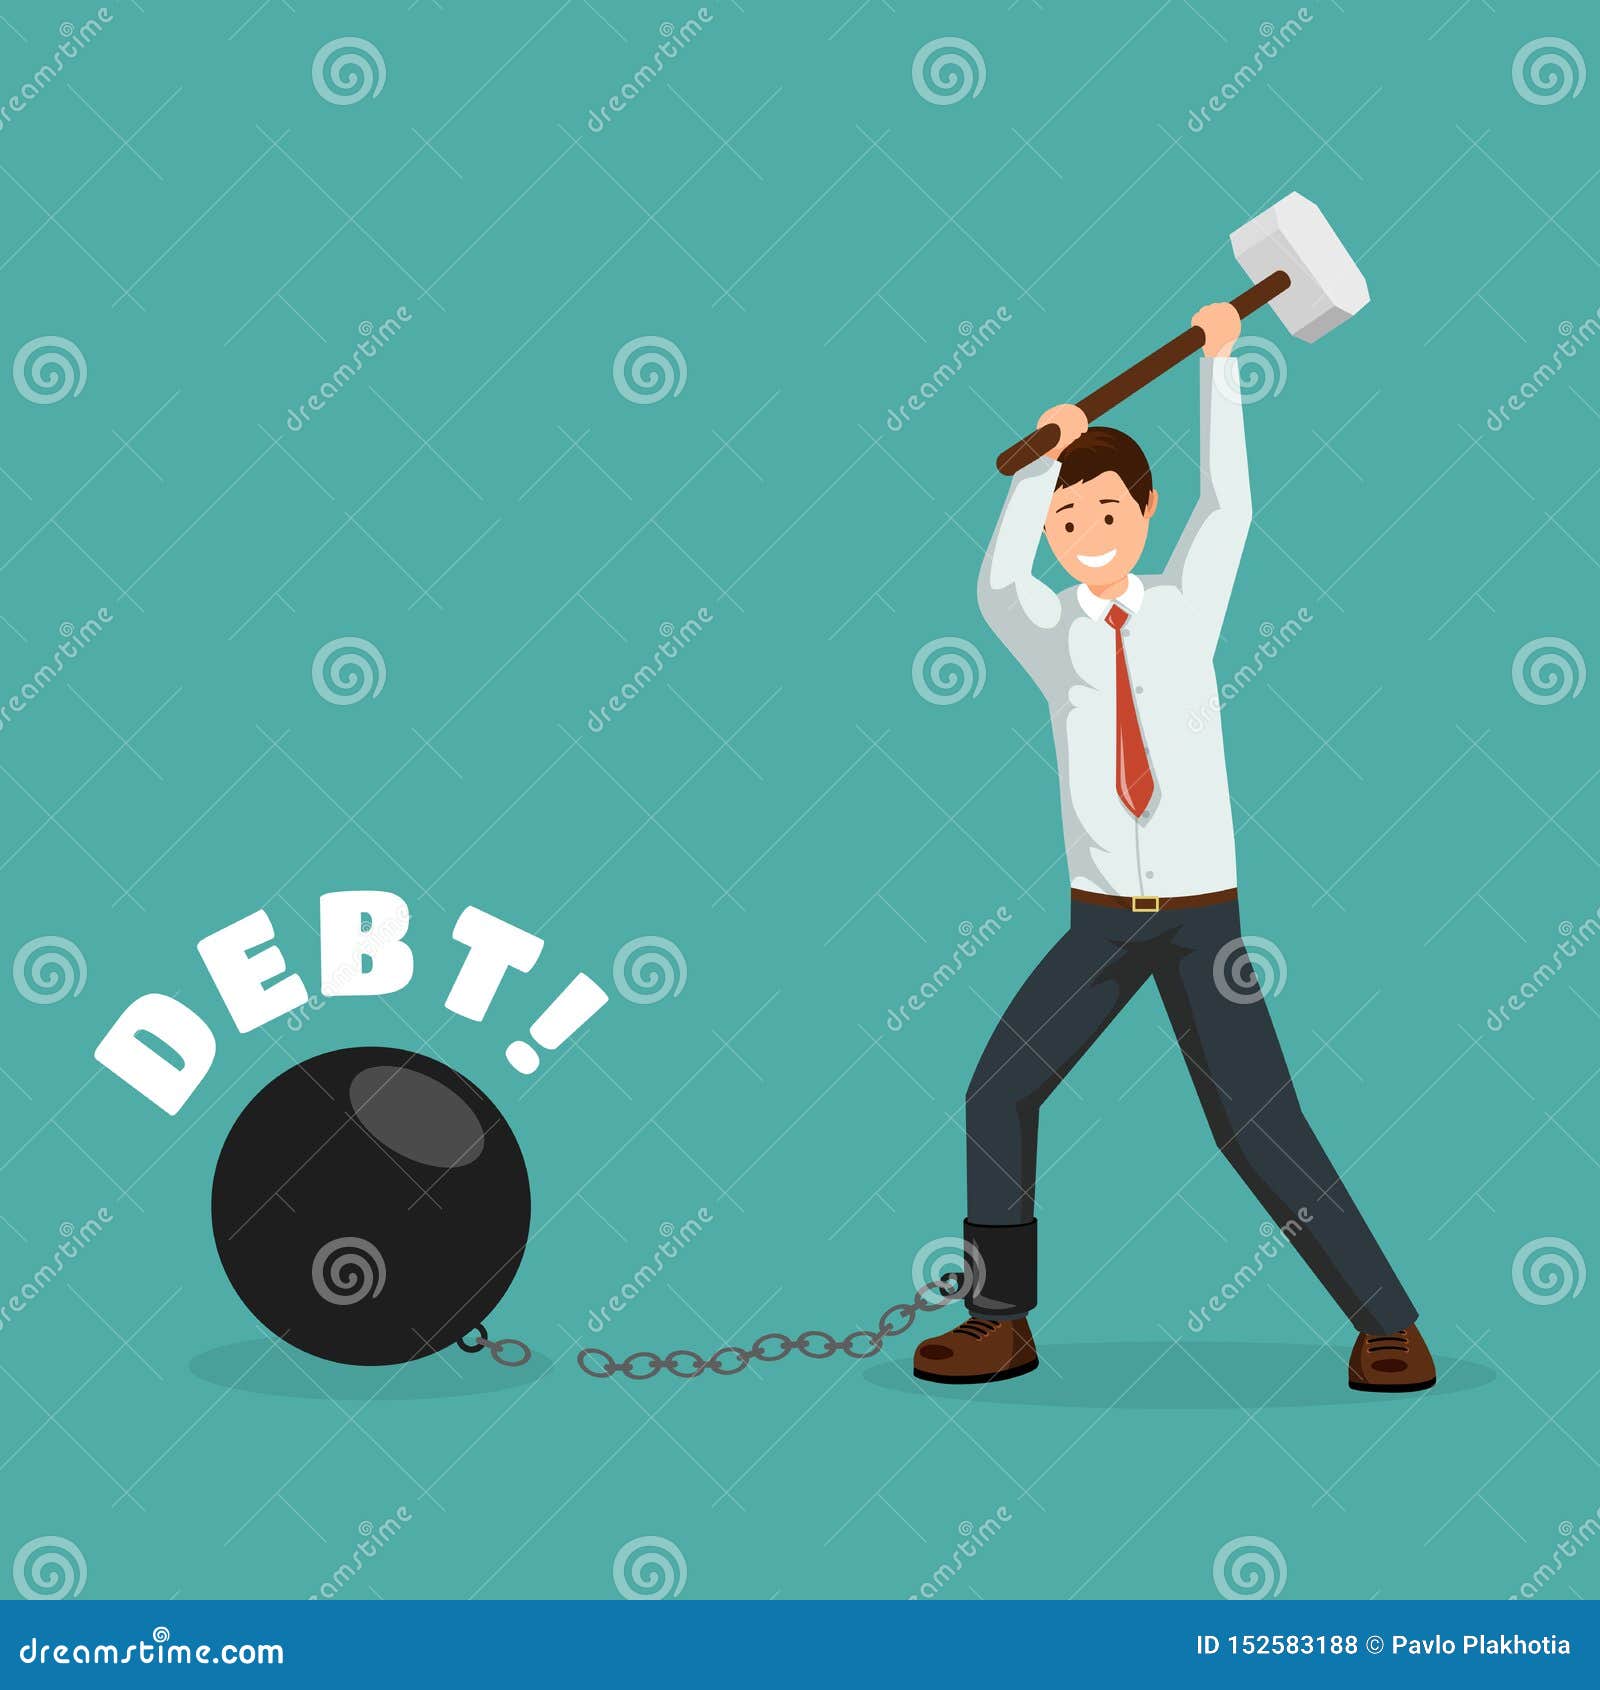 paying debt metaphor  banner template. cartoon man breaking financial chains with sledge hammer. happy debtor